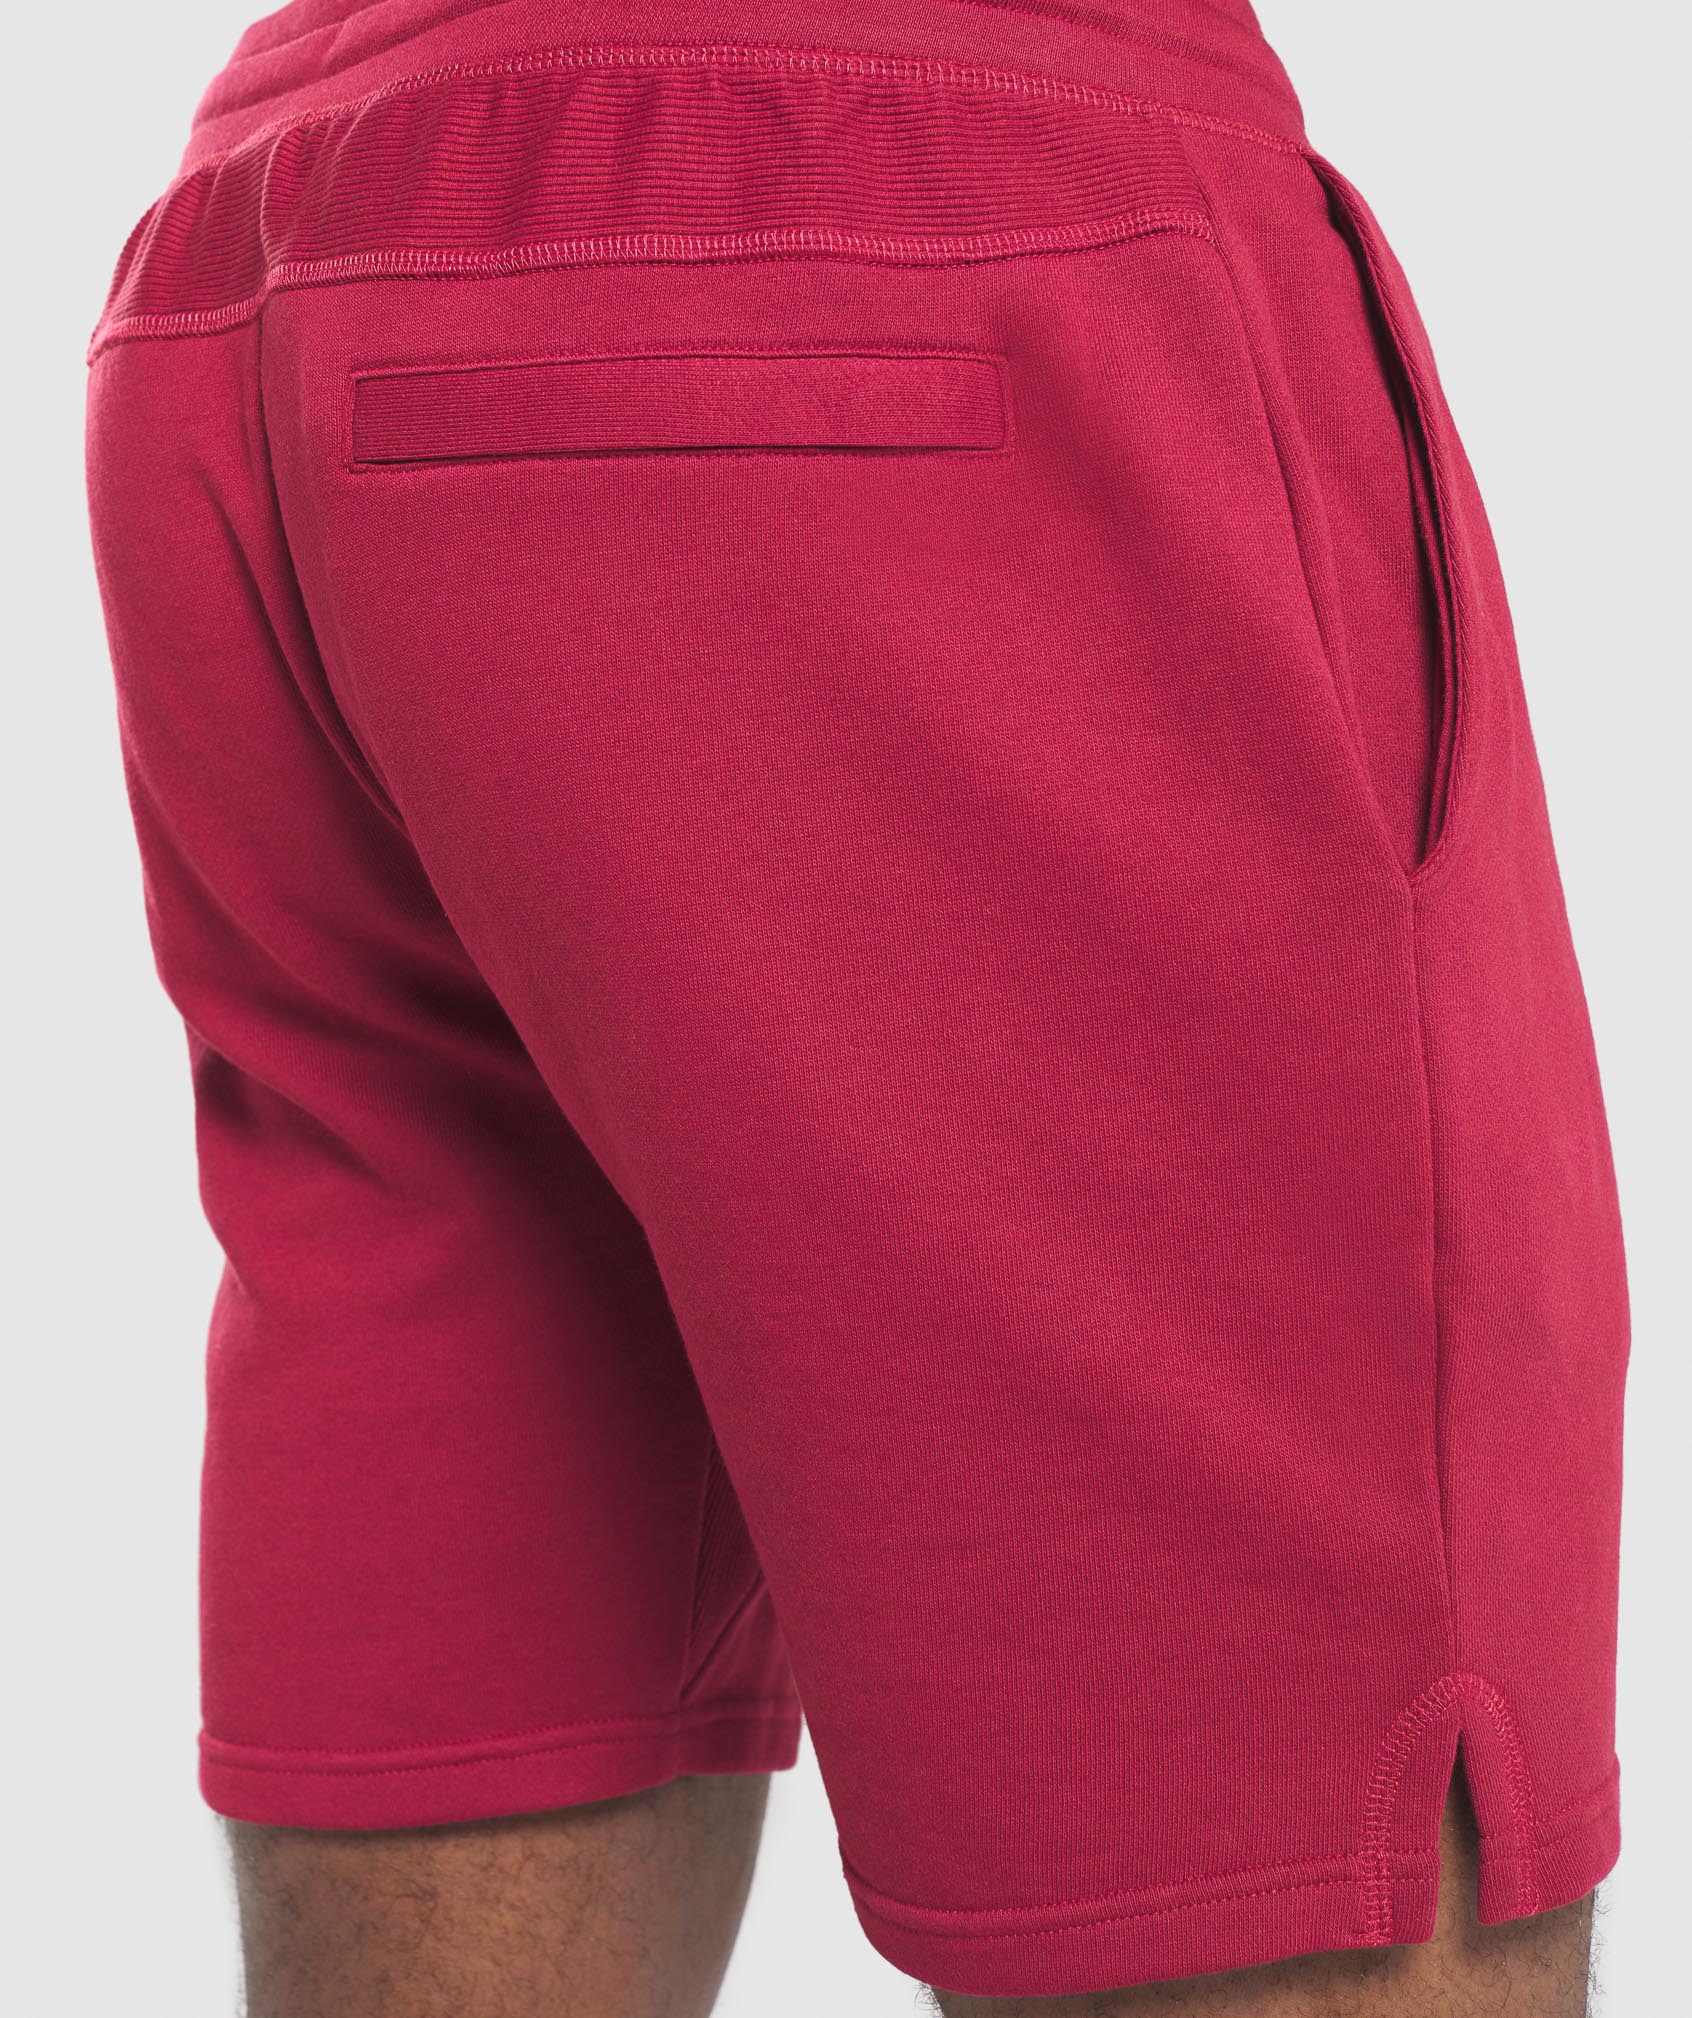 Compound Shorts in Burgundy - view 5